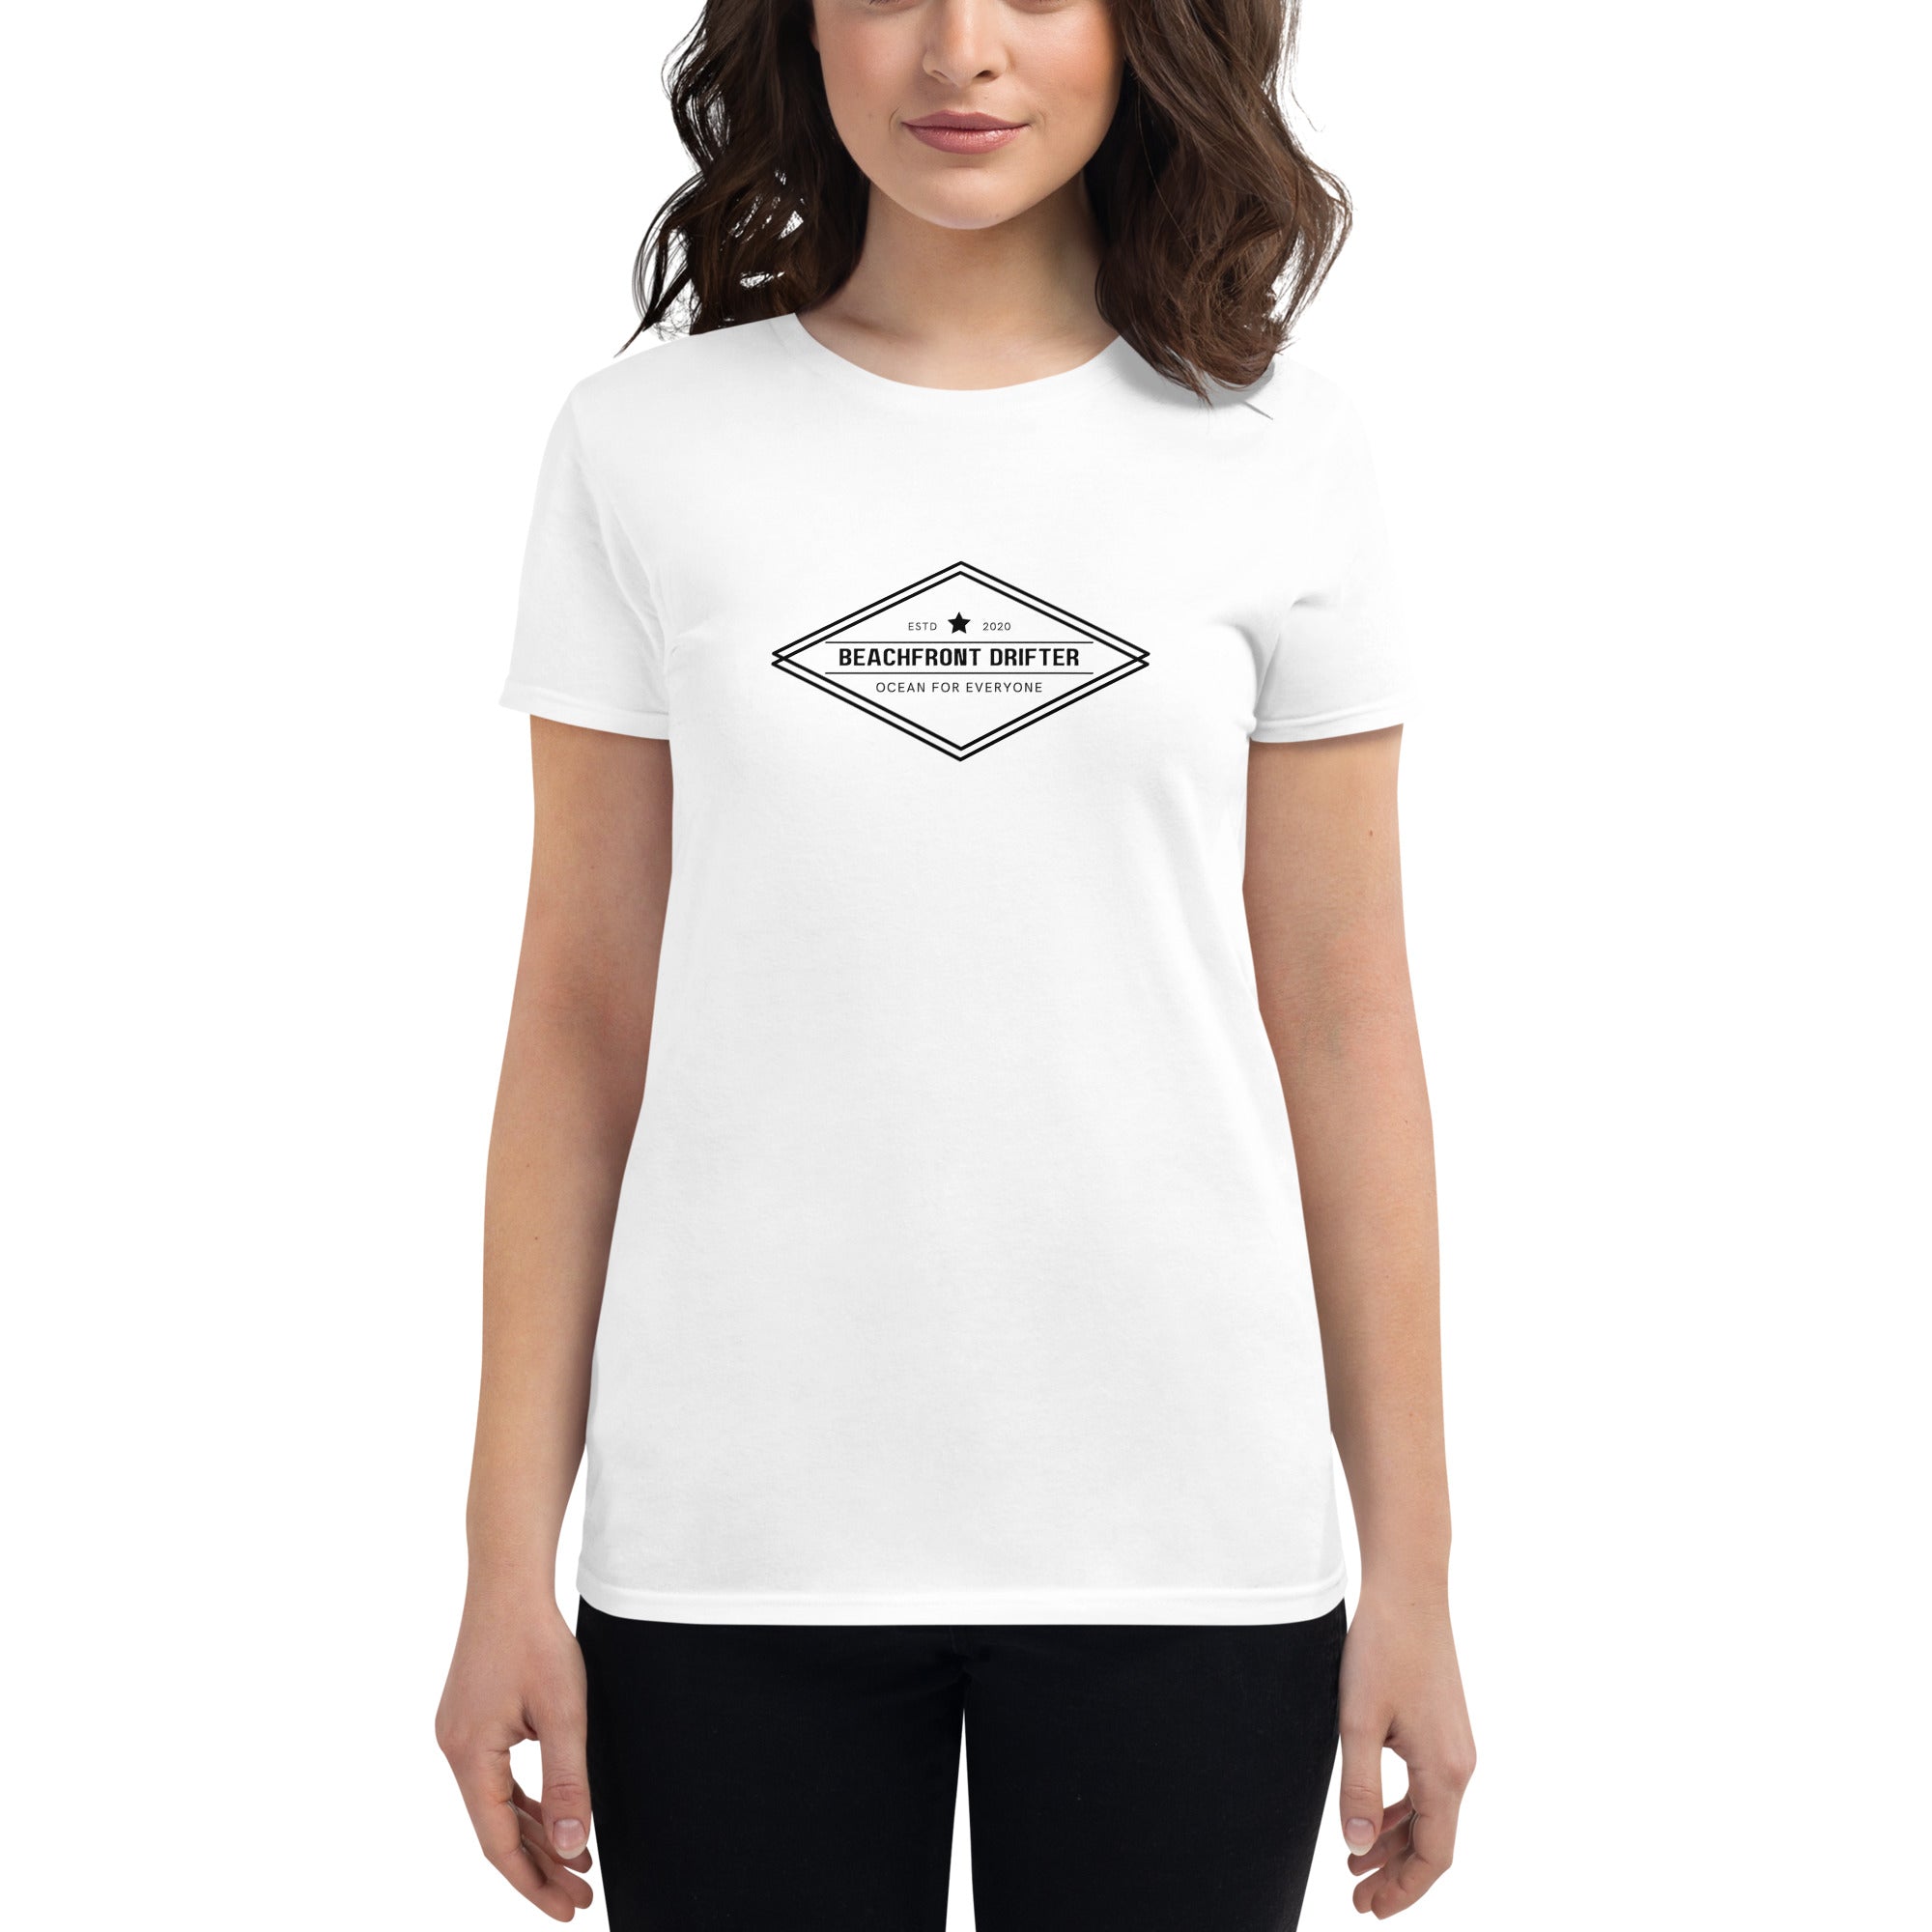 Women's Shirts and Tops